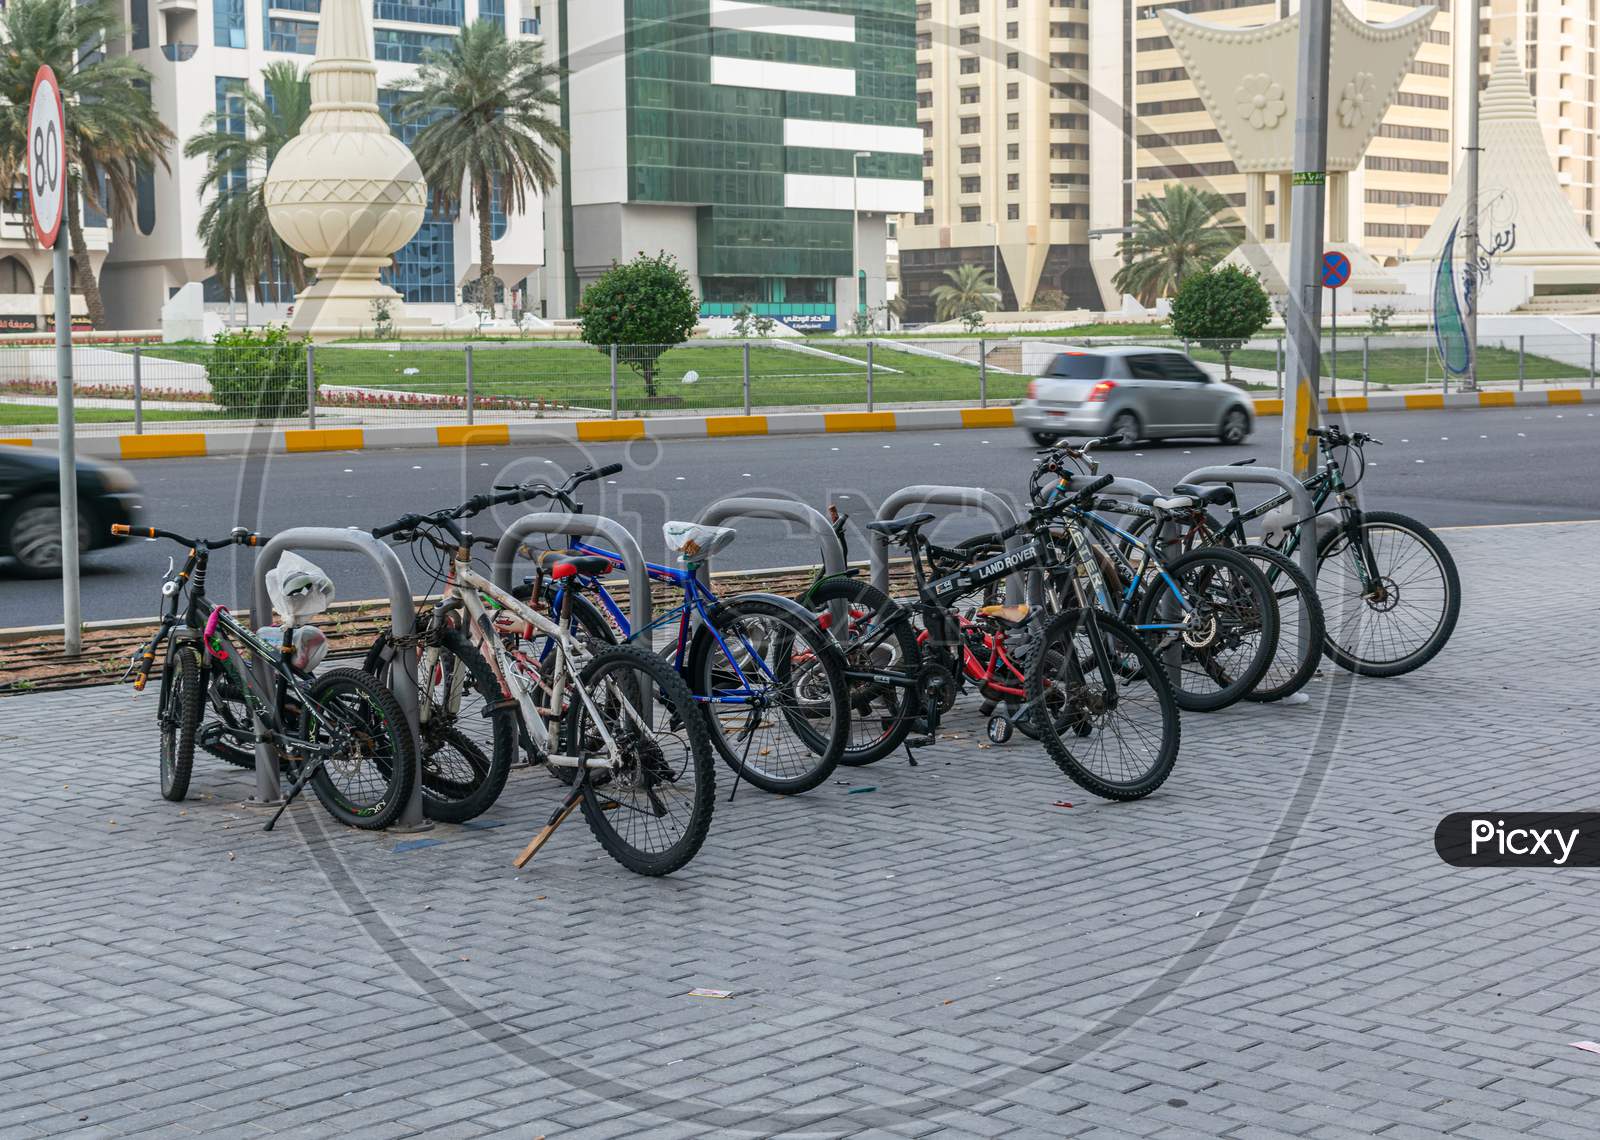 A Group Of Bycicles Parked In A Parking Space In Abu Dhabi Street.A Group Of Bicycles Parked In A Parking Space In Abu Dhabi Street.